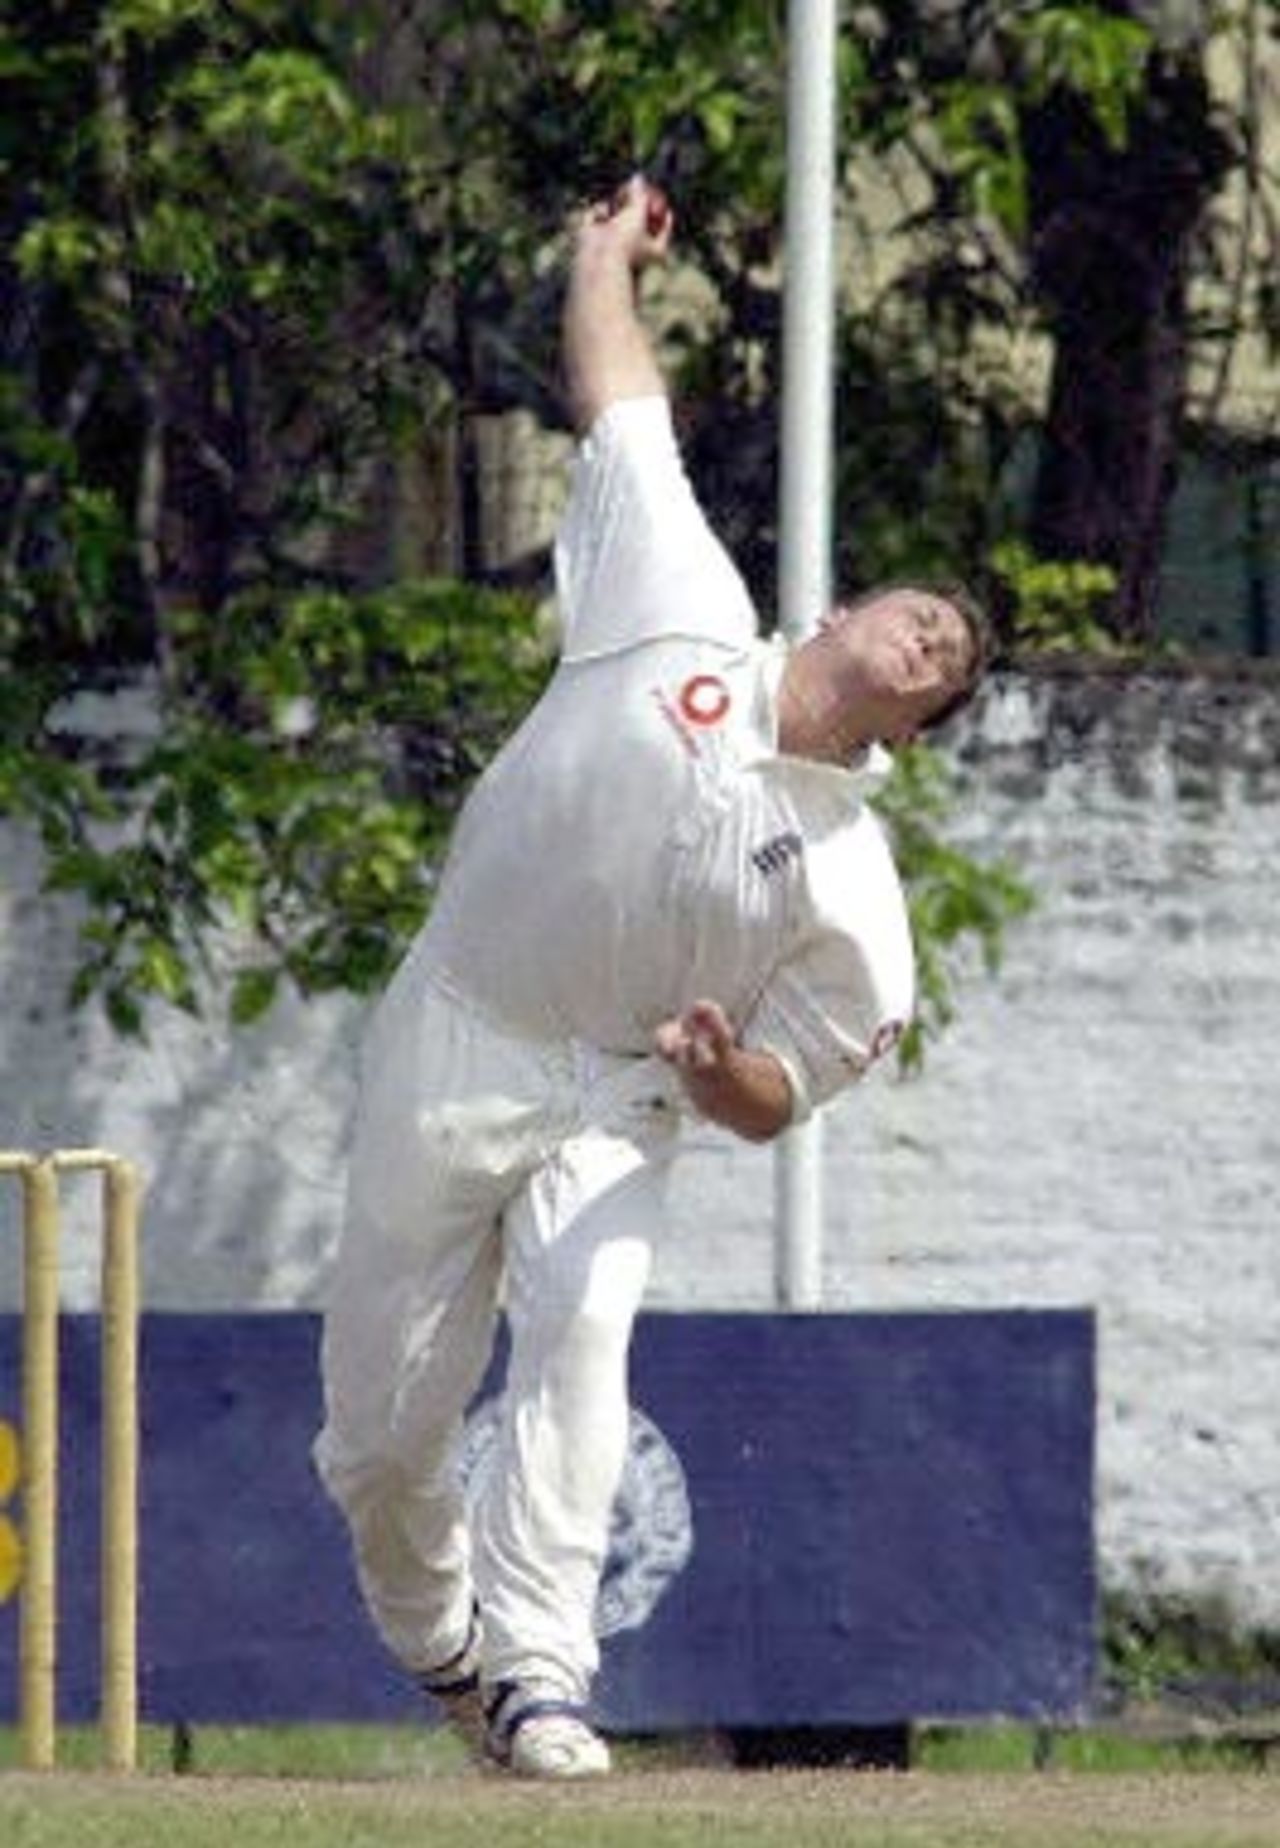 England bowler Darren Gough in action 09 February 2001 in the second day of a four-day match in Colombo. England opened their tour officially with a test match 22 February.